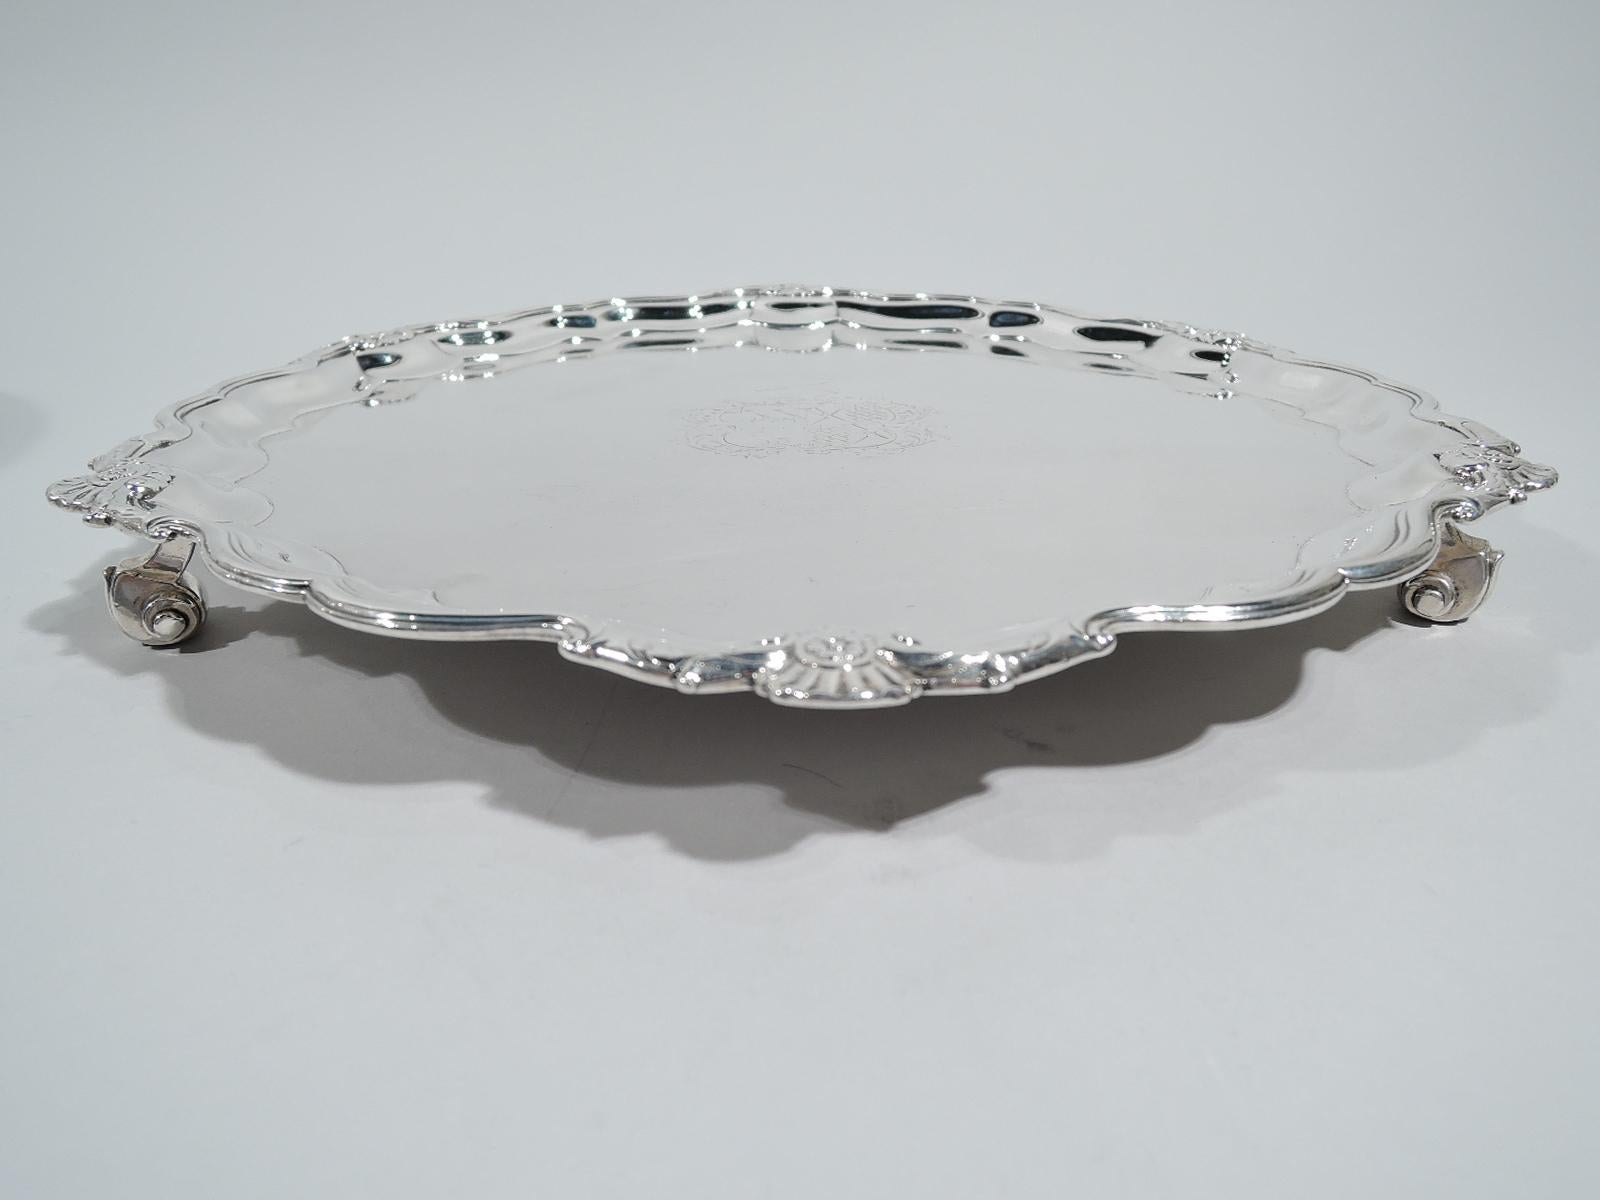 George II sterling silver salver. Made by George Wickes in London in 1747. Molded and scrolled piecrust rim interspersed with scallop shells. Well center has engraved armorial with raised spear. Three capped volute supports. Fully marked. Weight: 26